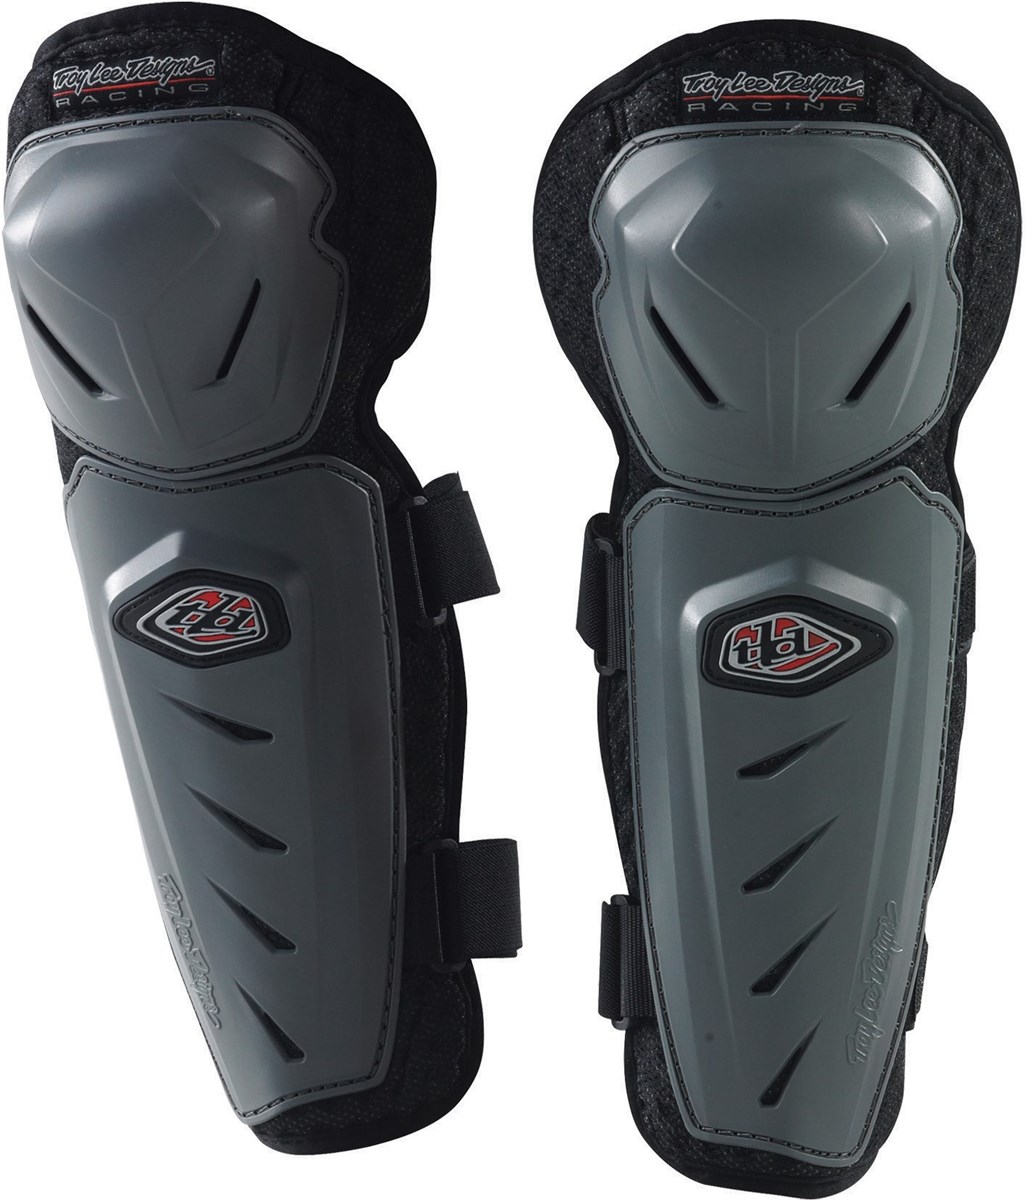 Troy Lee Designs Protection Youth Polycarbonate Knee Guards 2016 product image